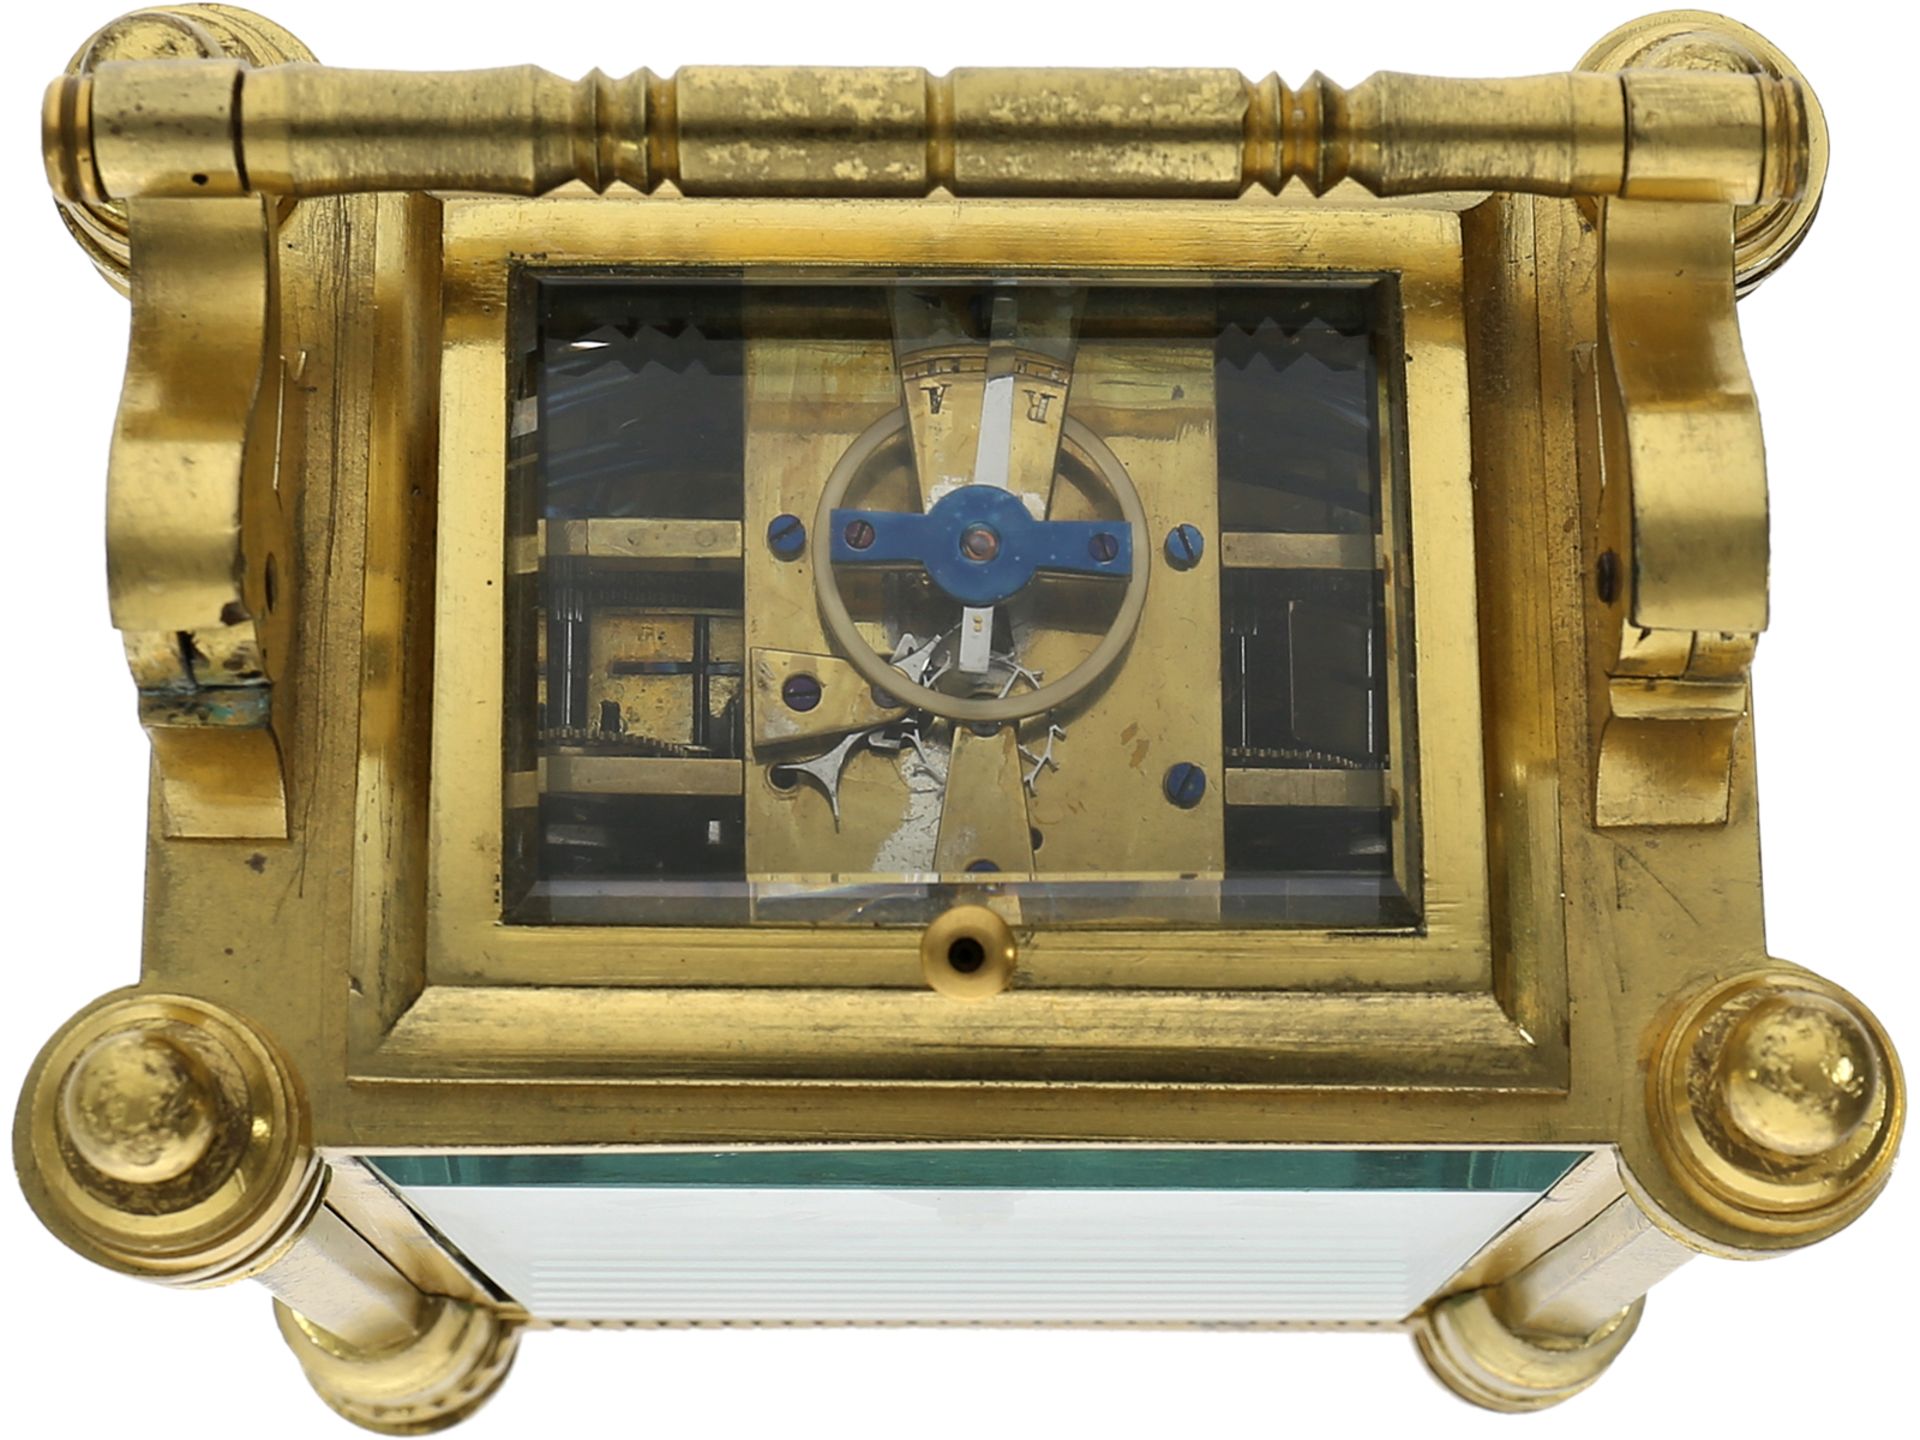 Travel clock: highly complicated, technically interesting travel clock with 4 complications, 19th ce - Image 6 of 6